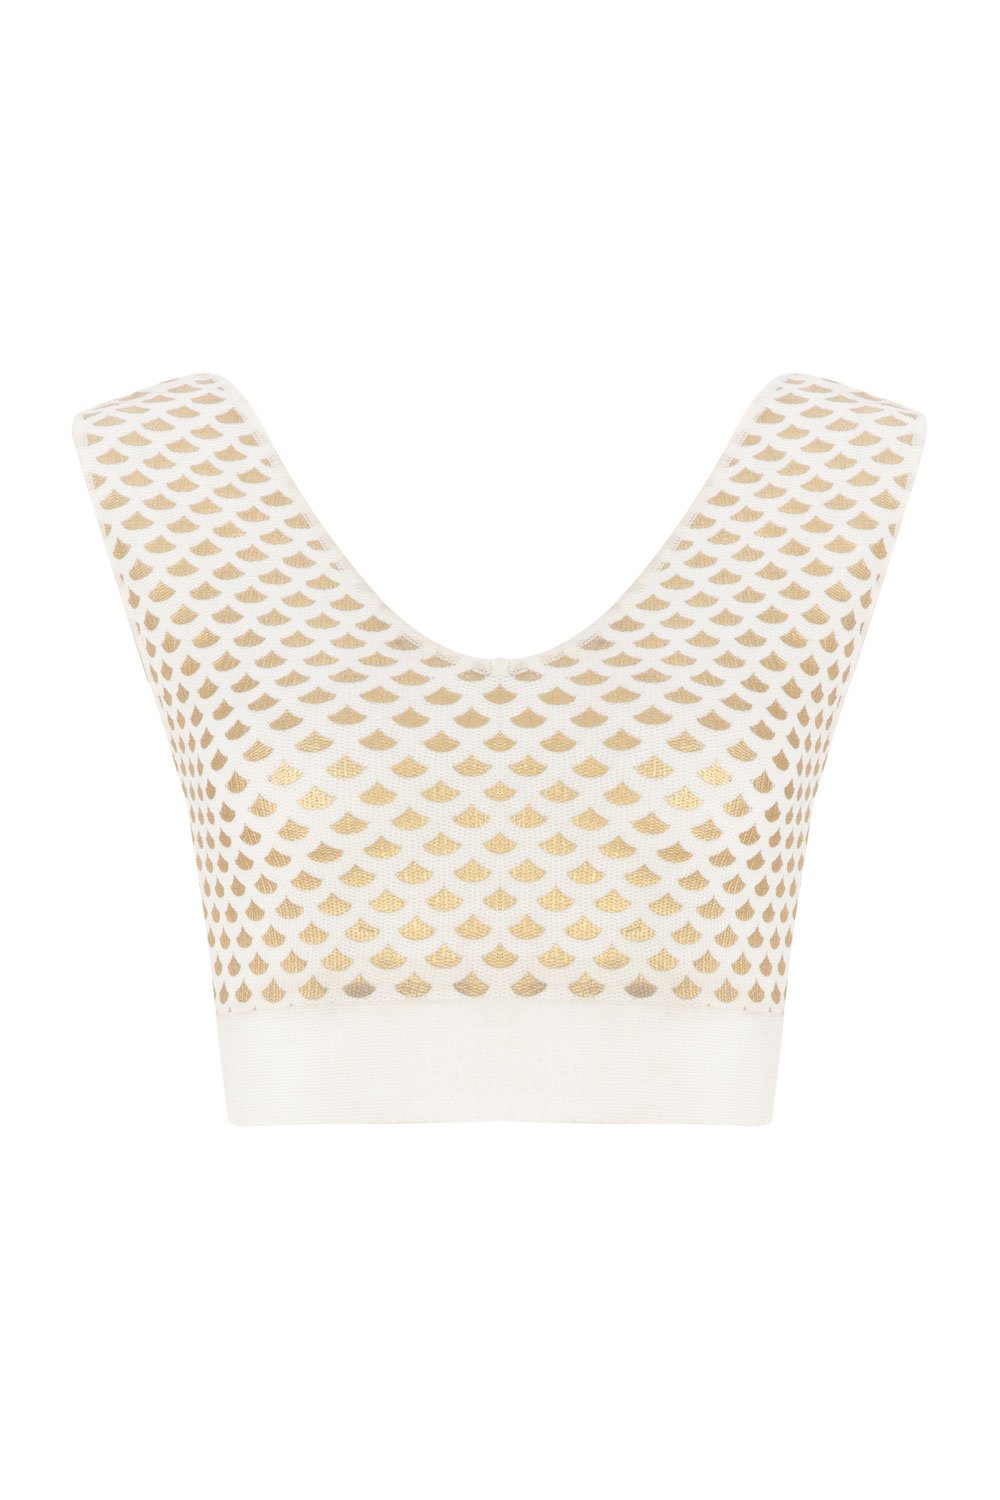 FOIL PRINTED CROP TOP WHITE-GOLD